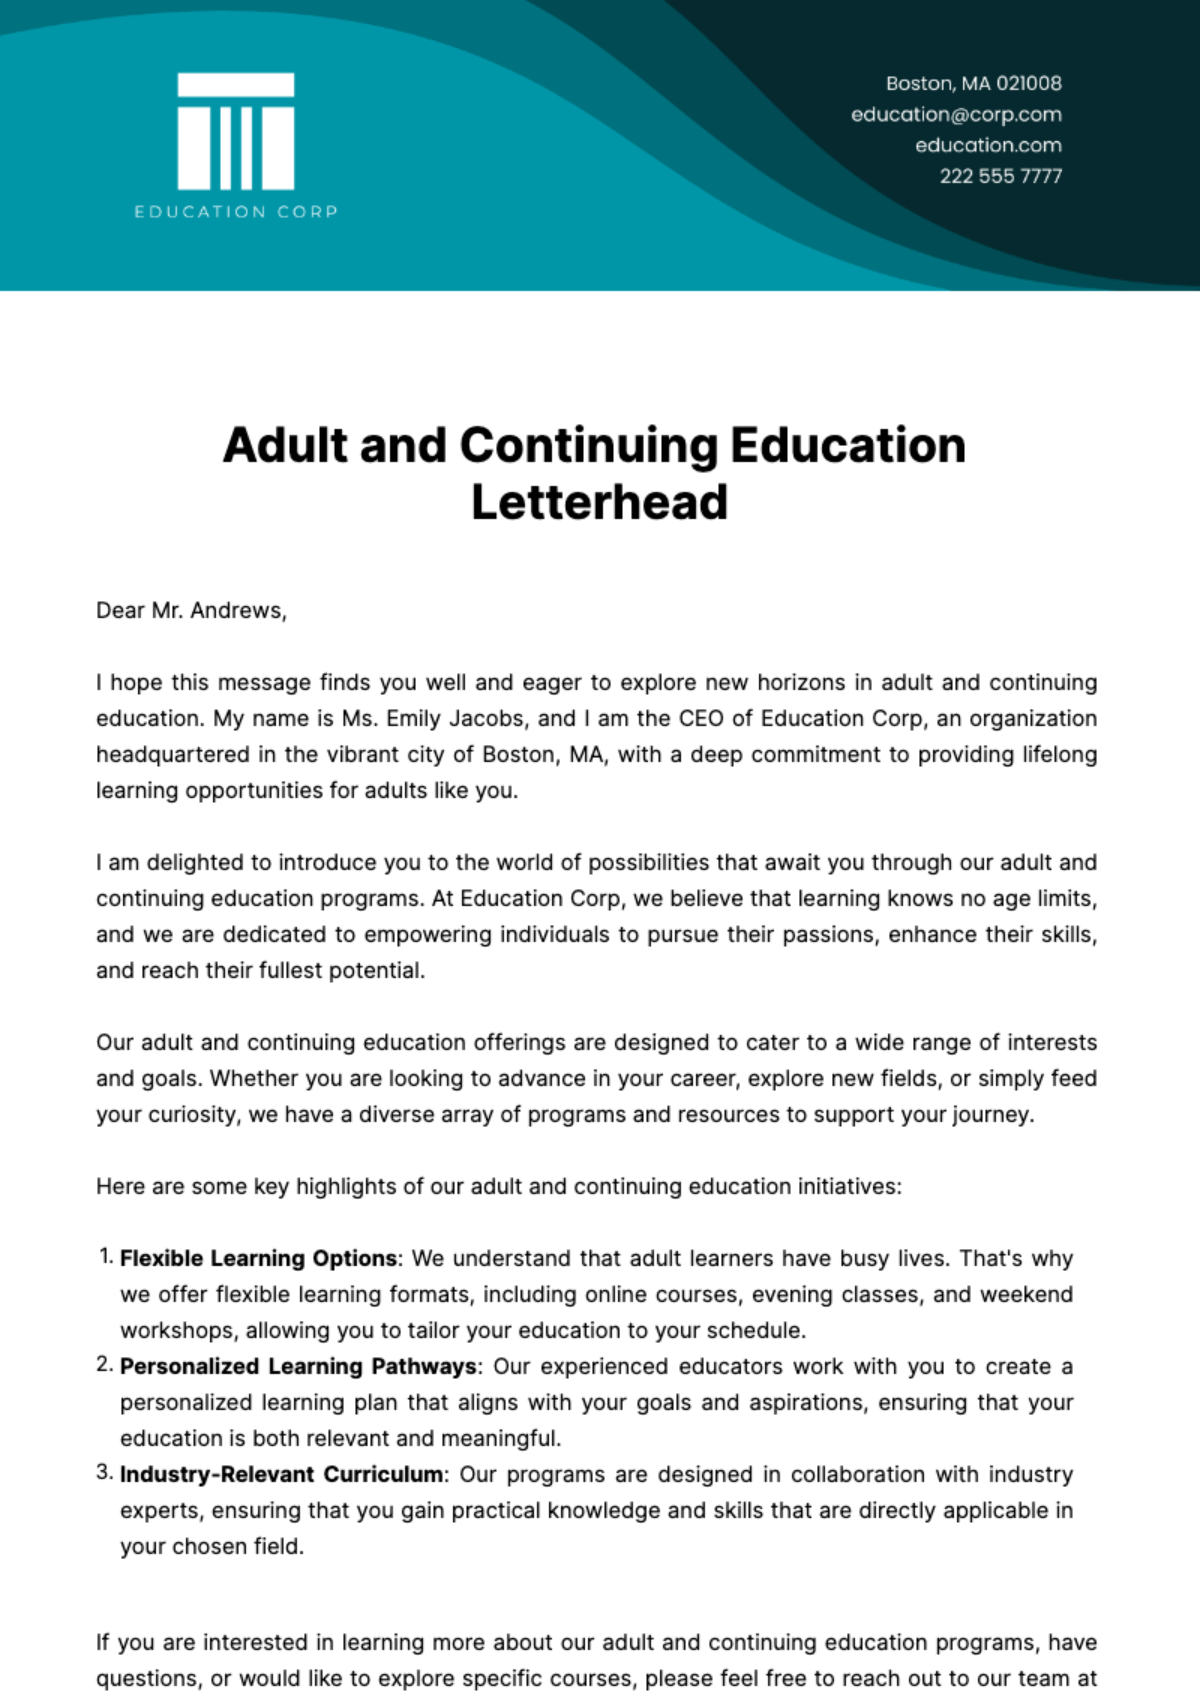 Free Adult and Continuing Education Letterhead Template